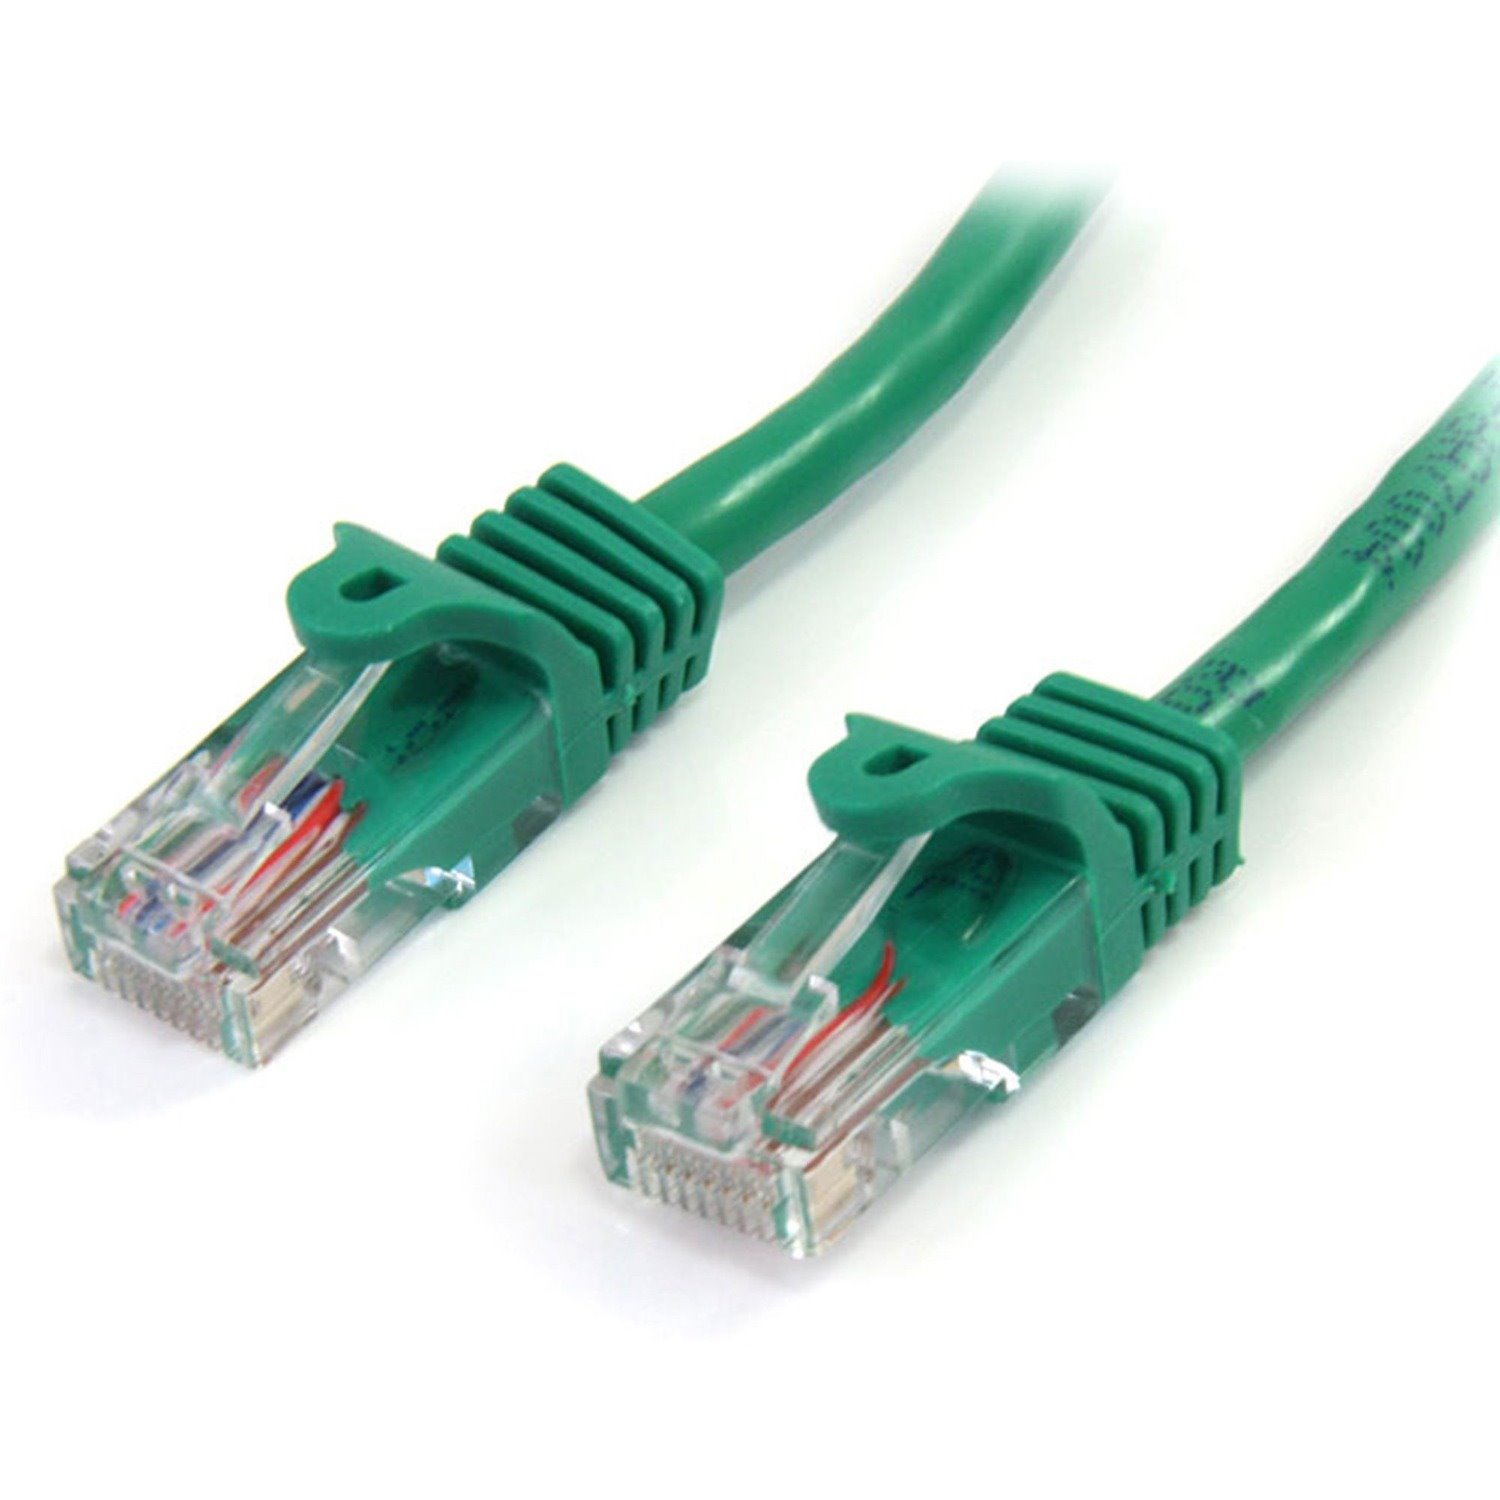 StarTech.com 3 m Green Cat5e Snagless RJ45 UTP Patch Cable - 3m Patch Cord - Ethernet Patch Cable - RJ45 Male to Male Cat 5e Cable